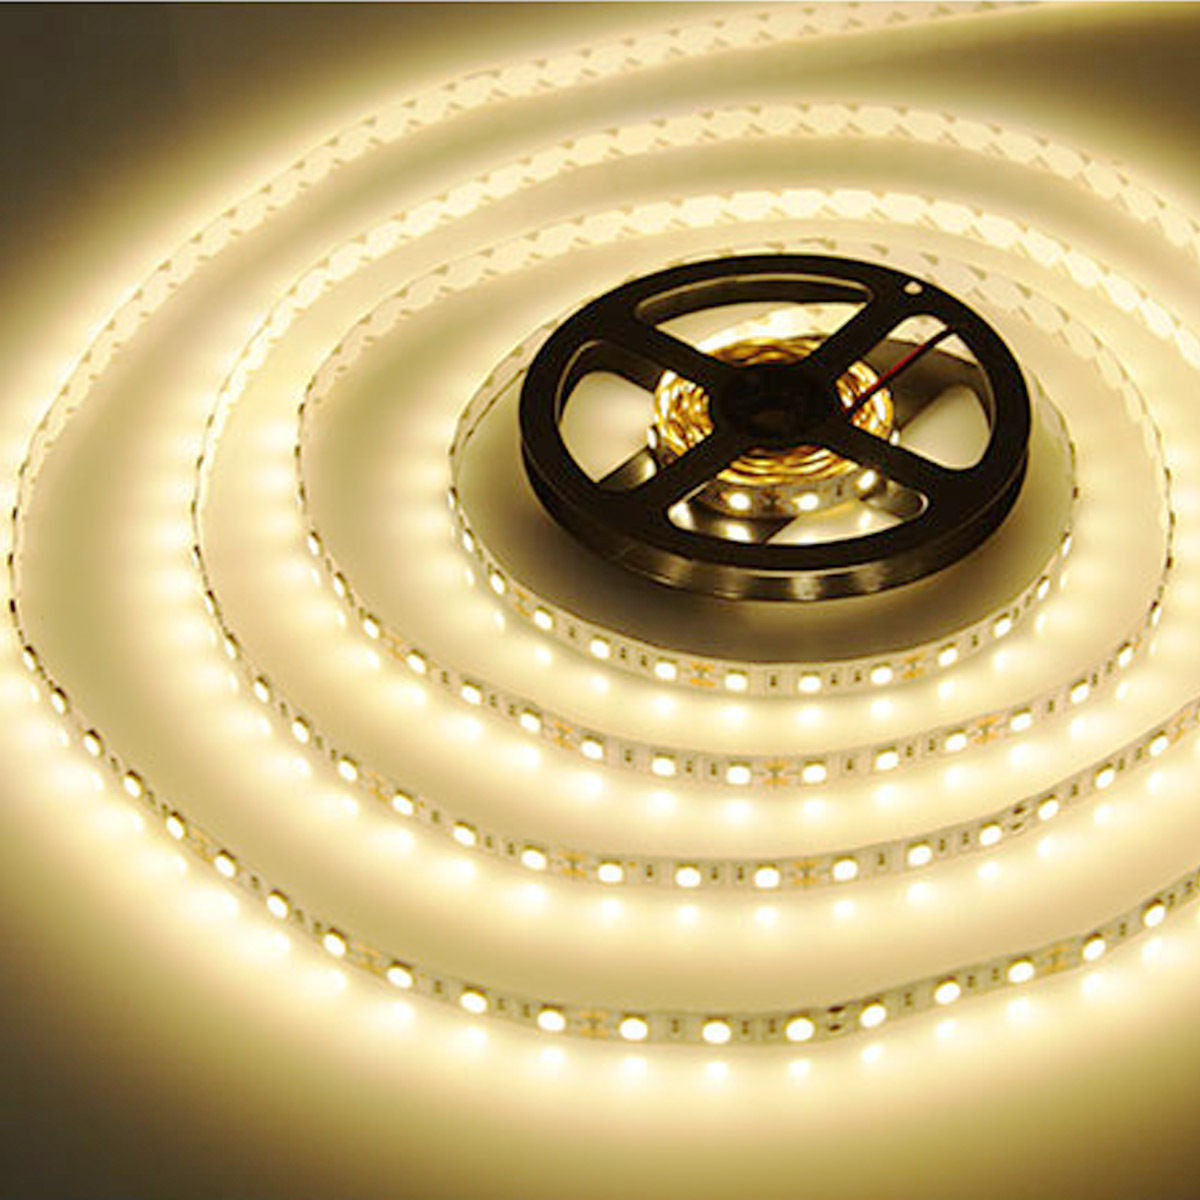 High quality White LED Strip light weight Non-Waterproof Night Flying